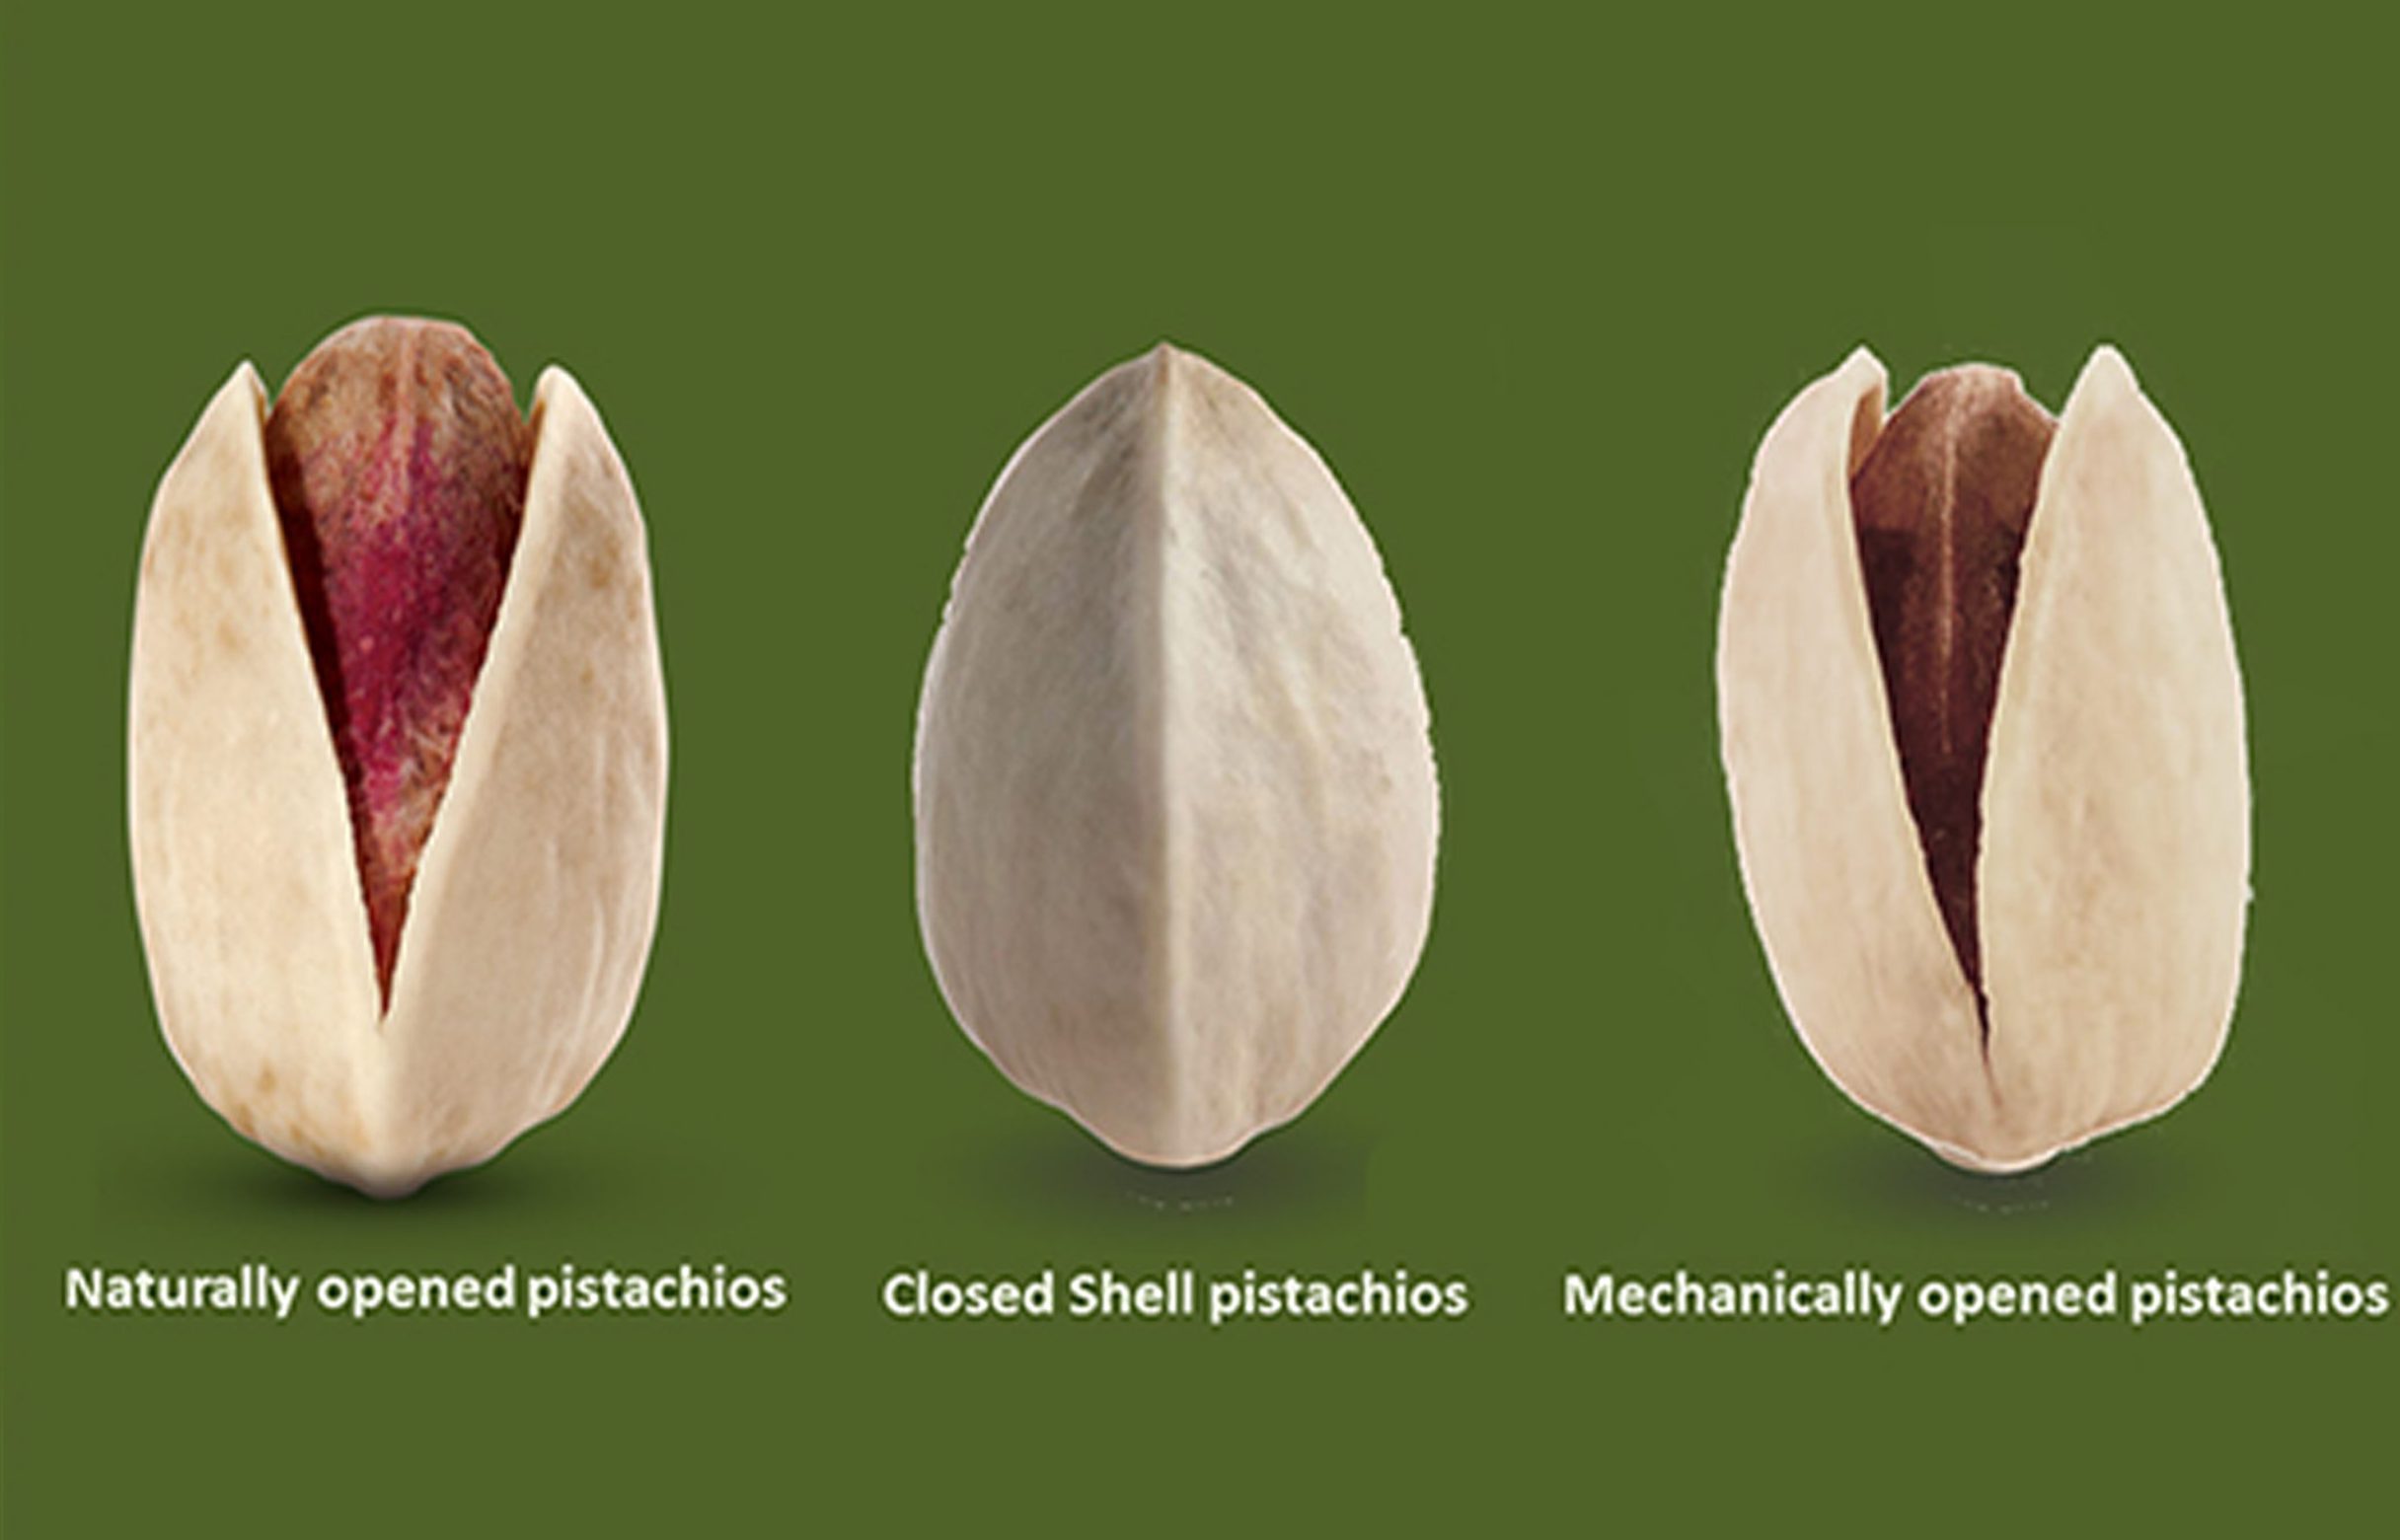 Mechanical Open Pistachio_ Mechanically Opened Pistachios‚ Manufacturer and Exporter_ Nutex Company